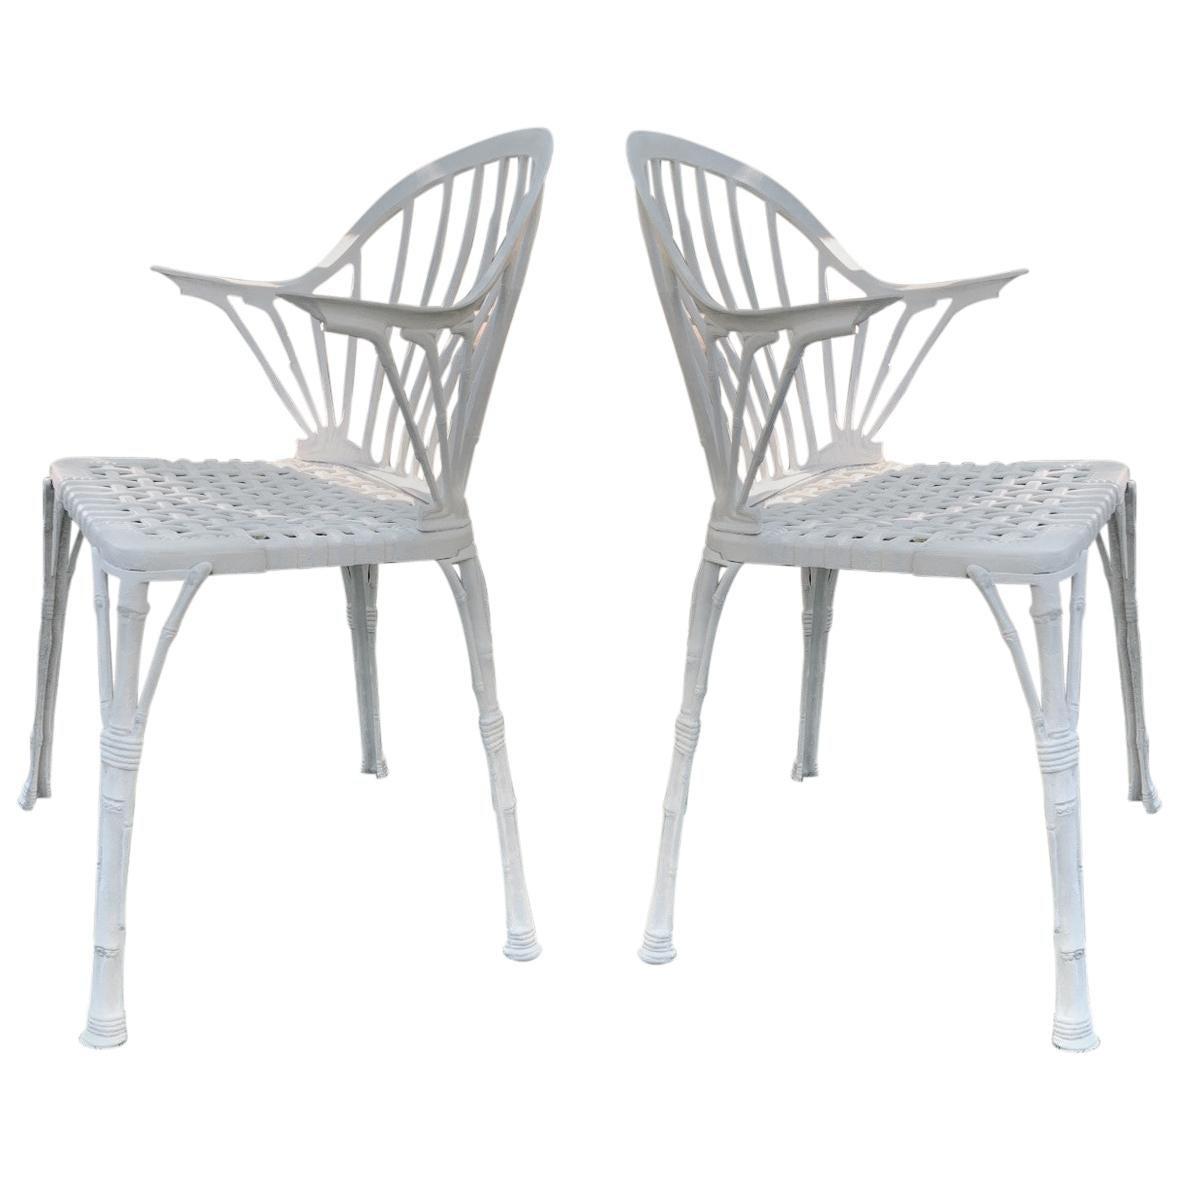 20th Renaissance Revival Style Pair of White Garden Chairs in Faux Bamboo